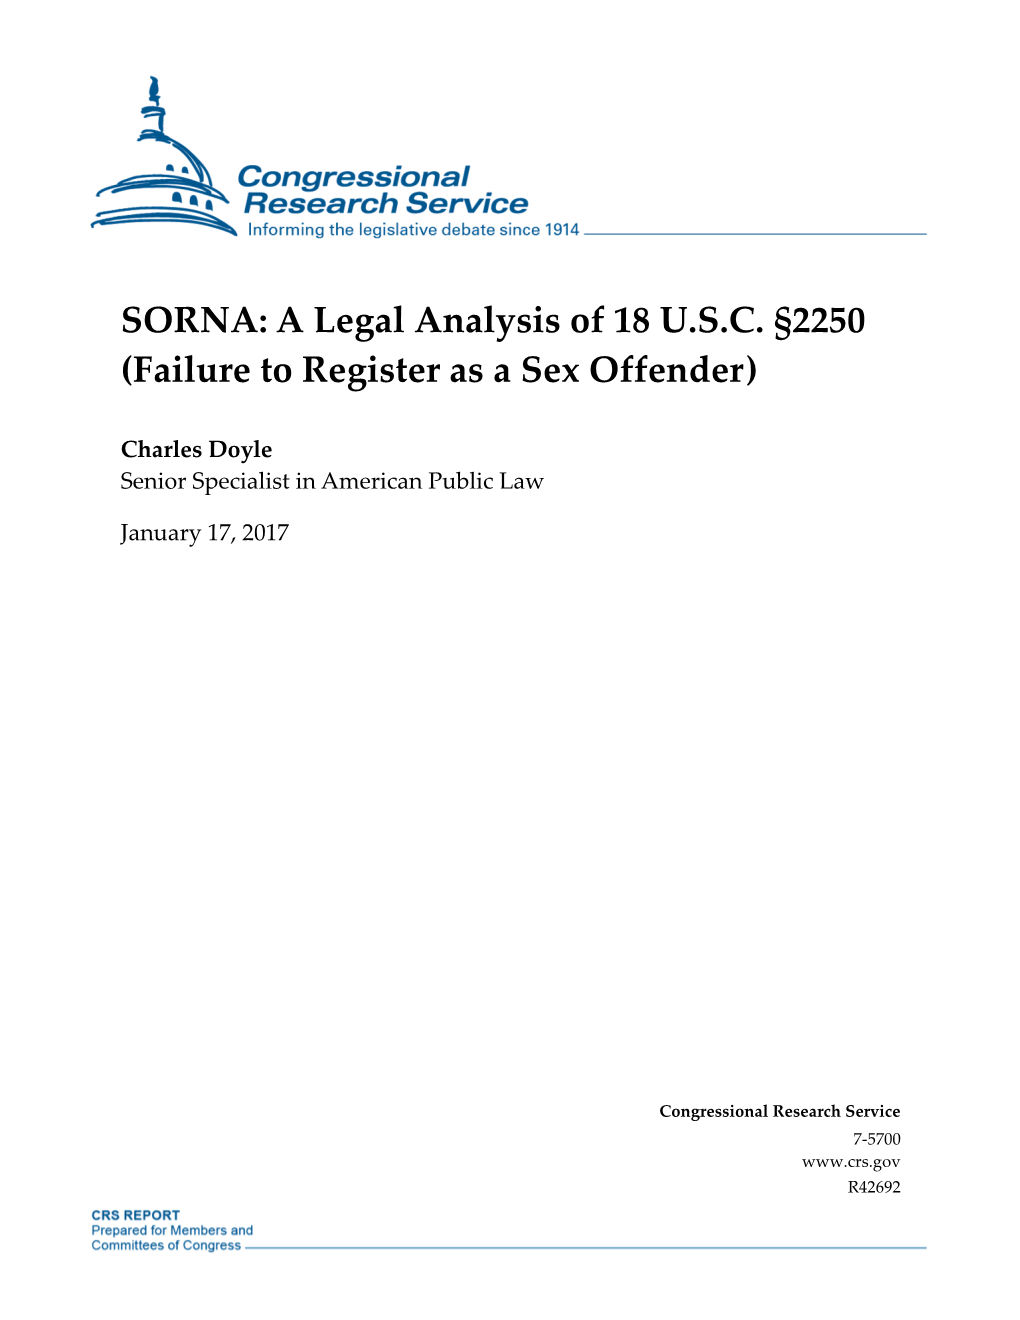 SORNA: a Legal Analysis of 18 U.S.C. §2250 (Failure to Register As a Sex Offender)